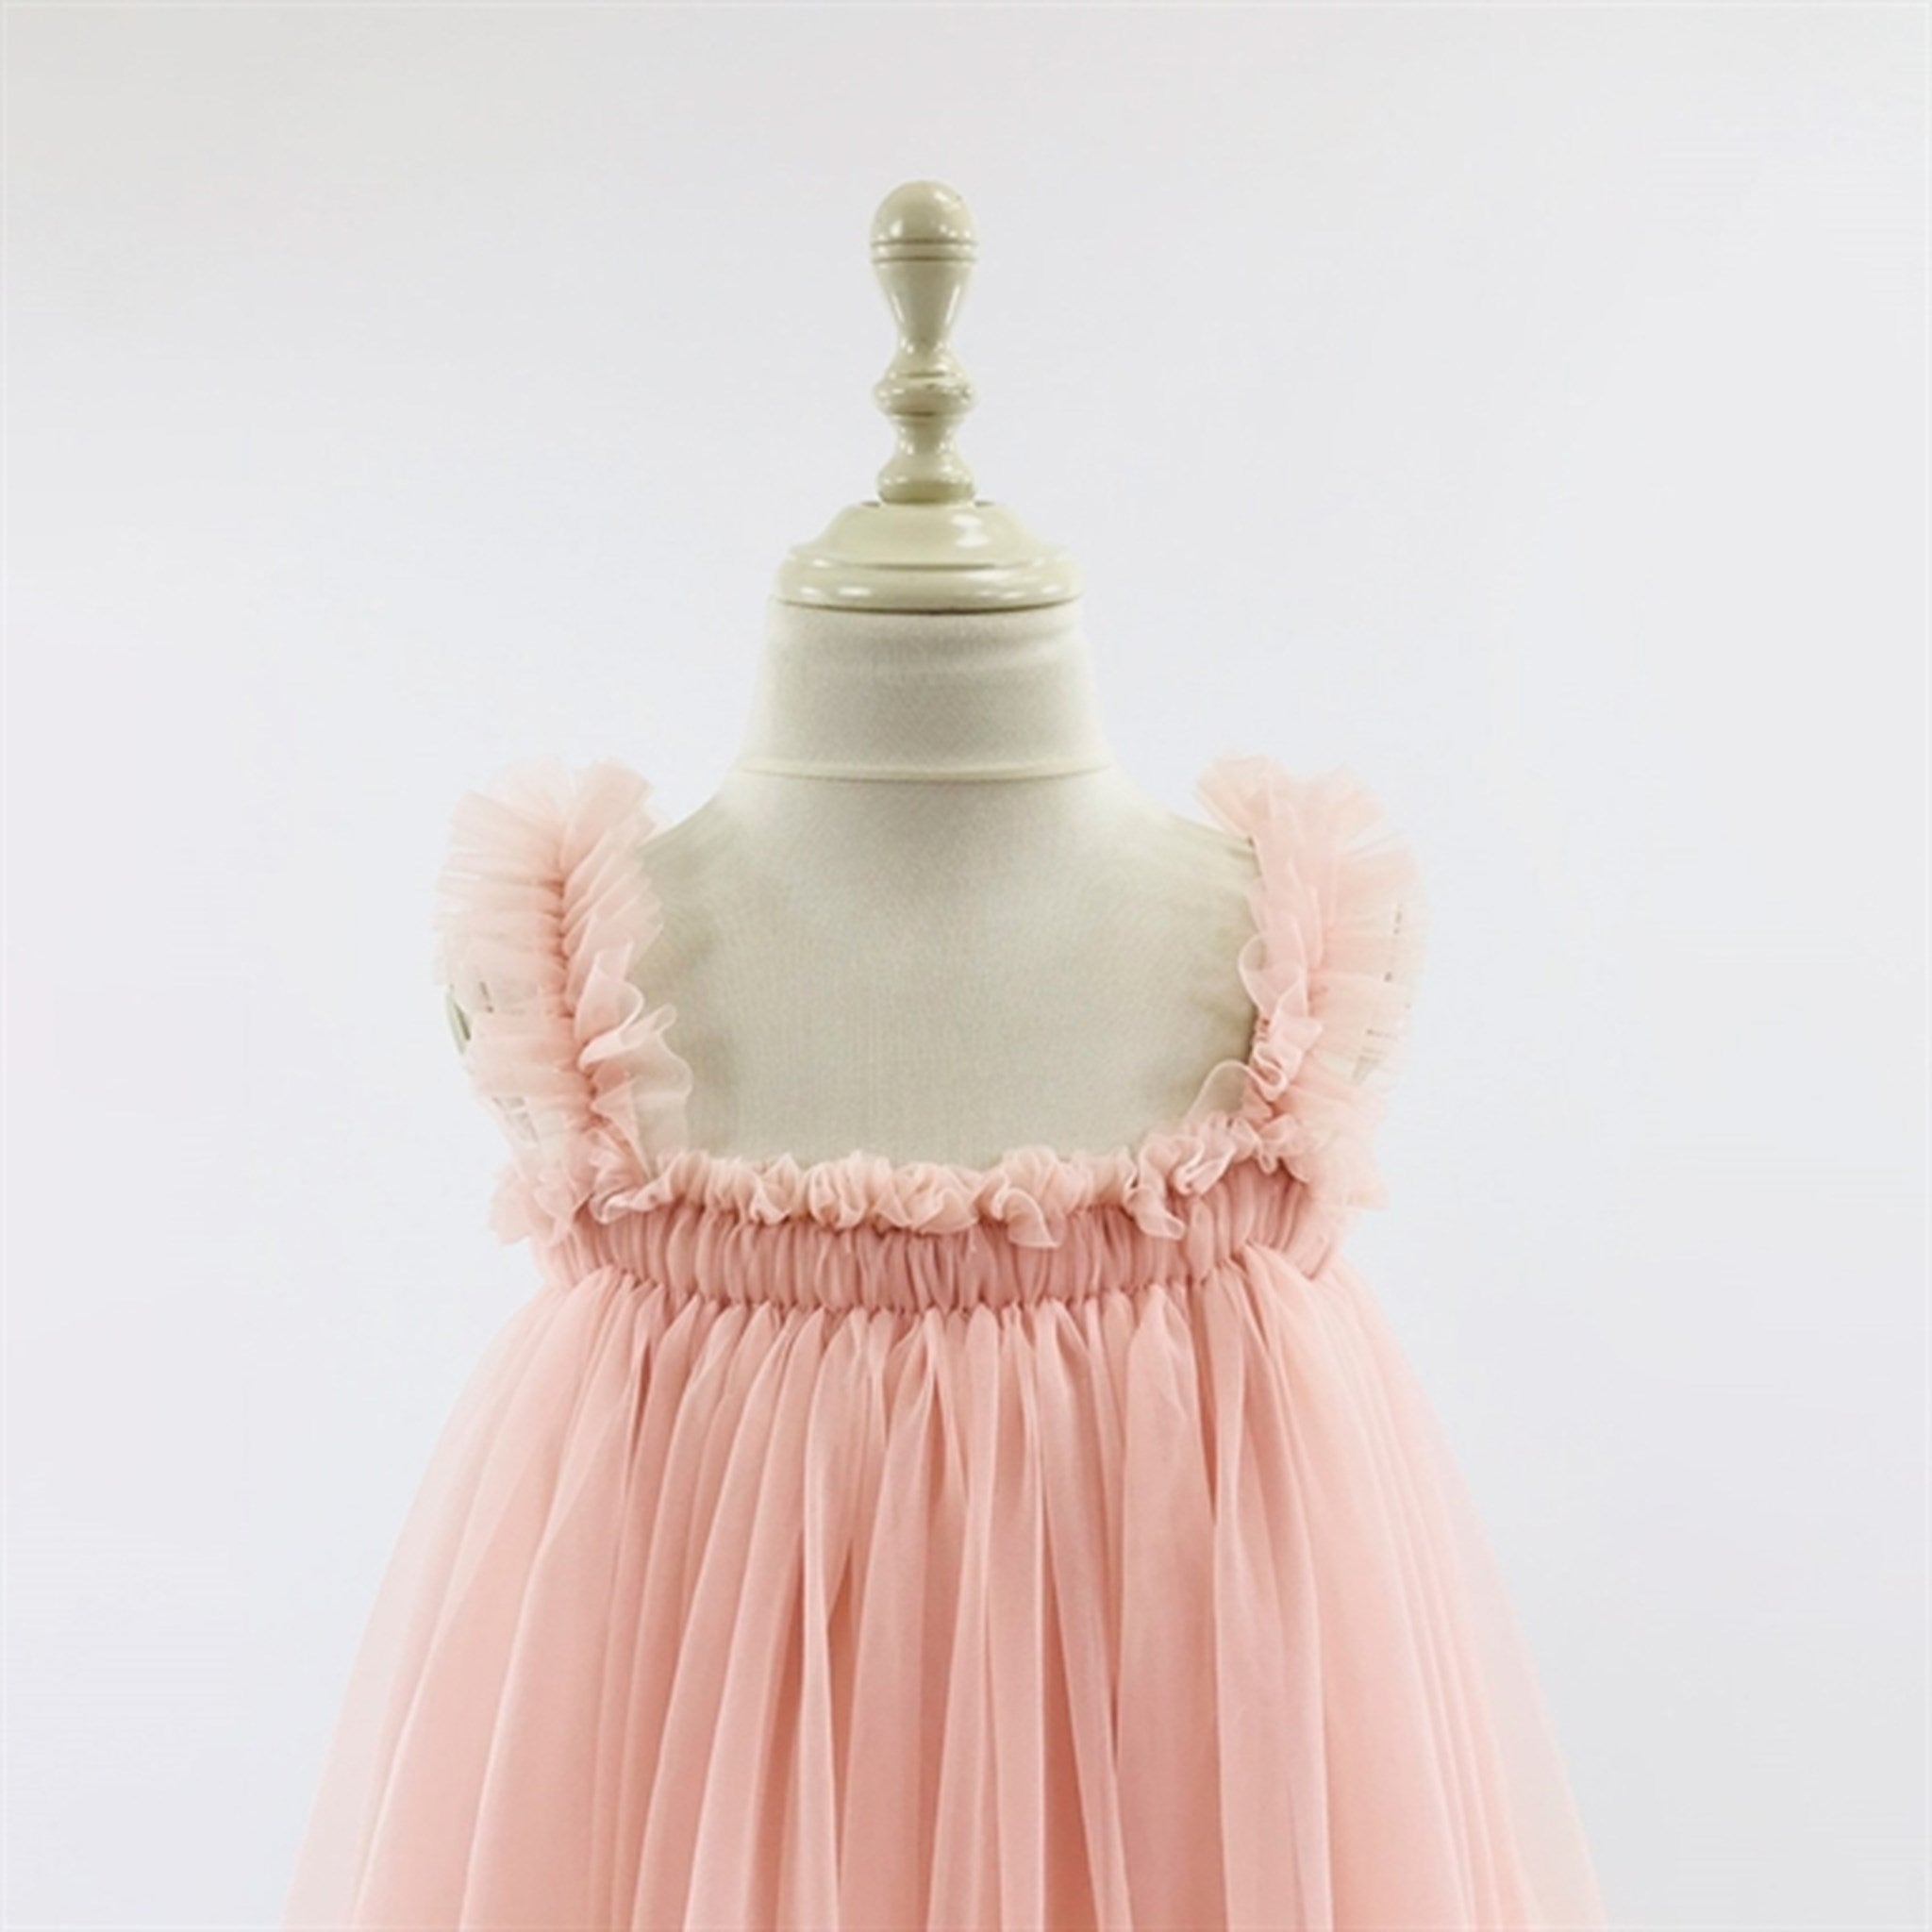 Dolly by Le Petit Tom Tutu Dress Beach Cover Up Ballet Pink 2